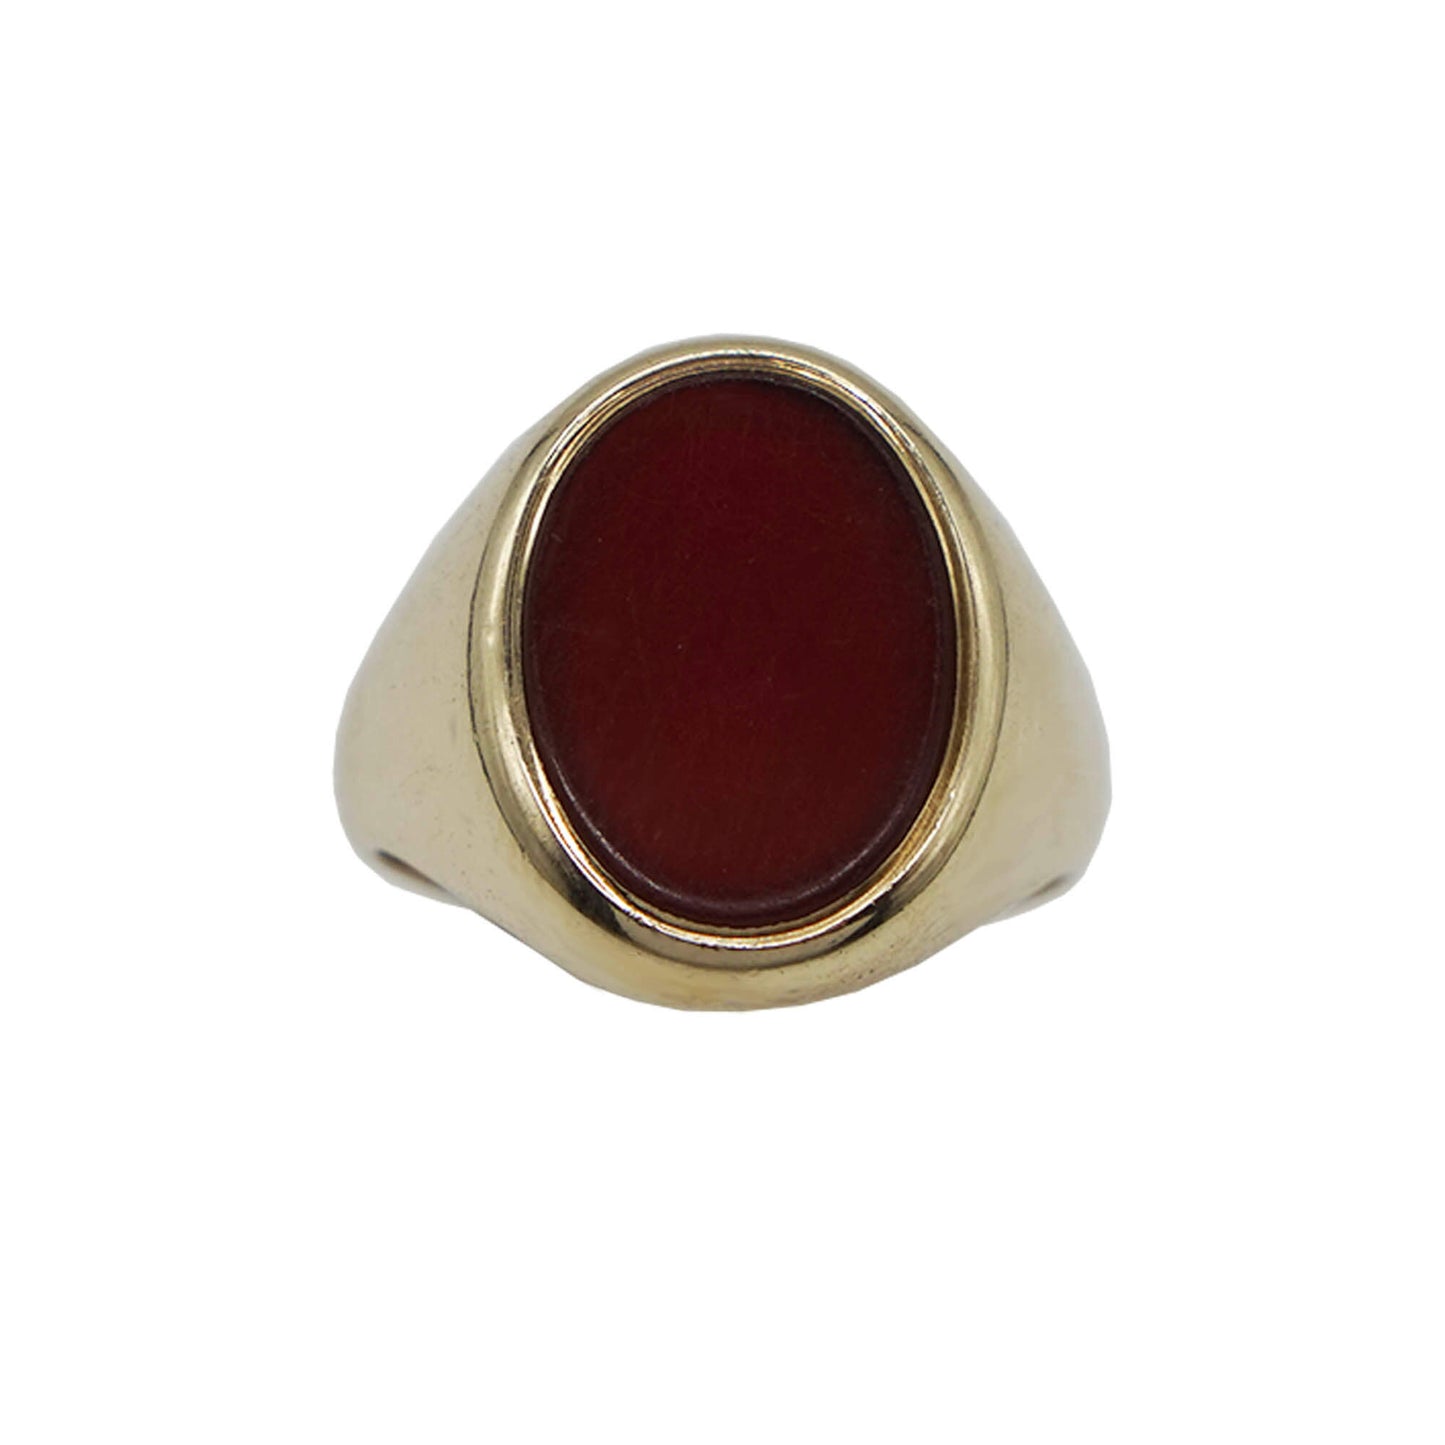 9k gold oval signet ring with red carnelian stone setting.